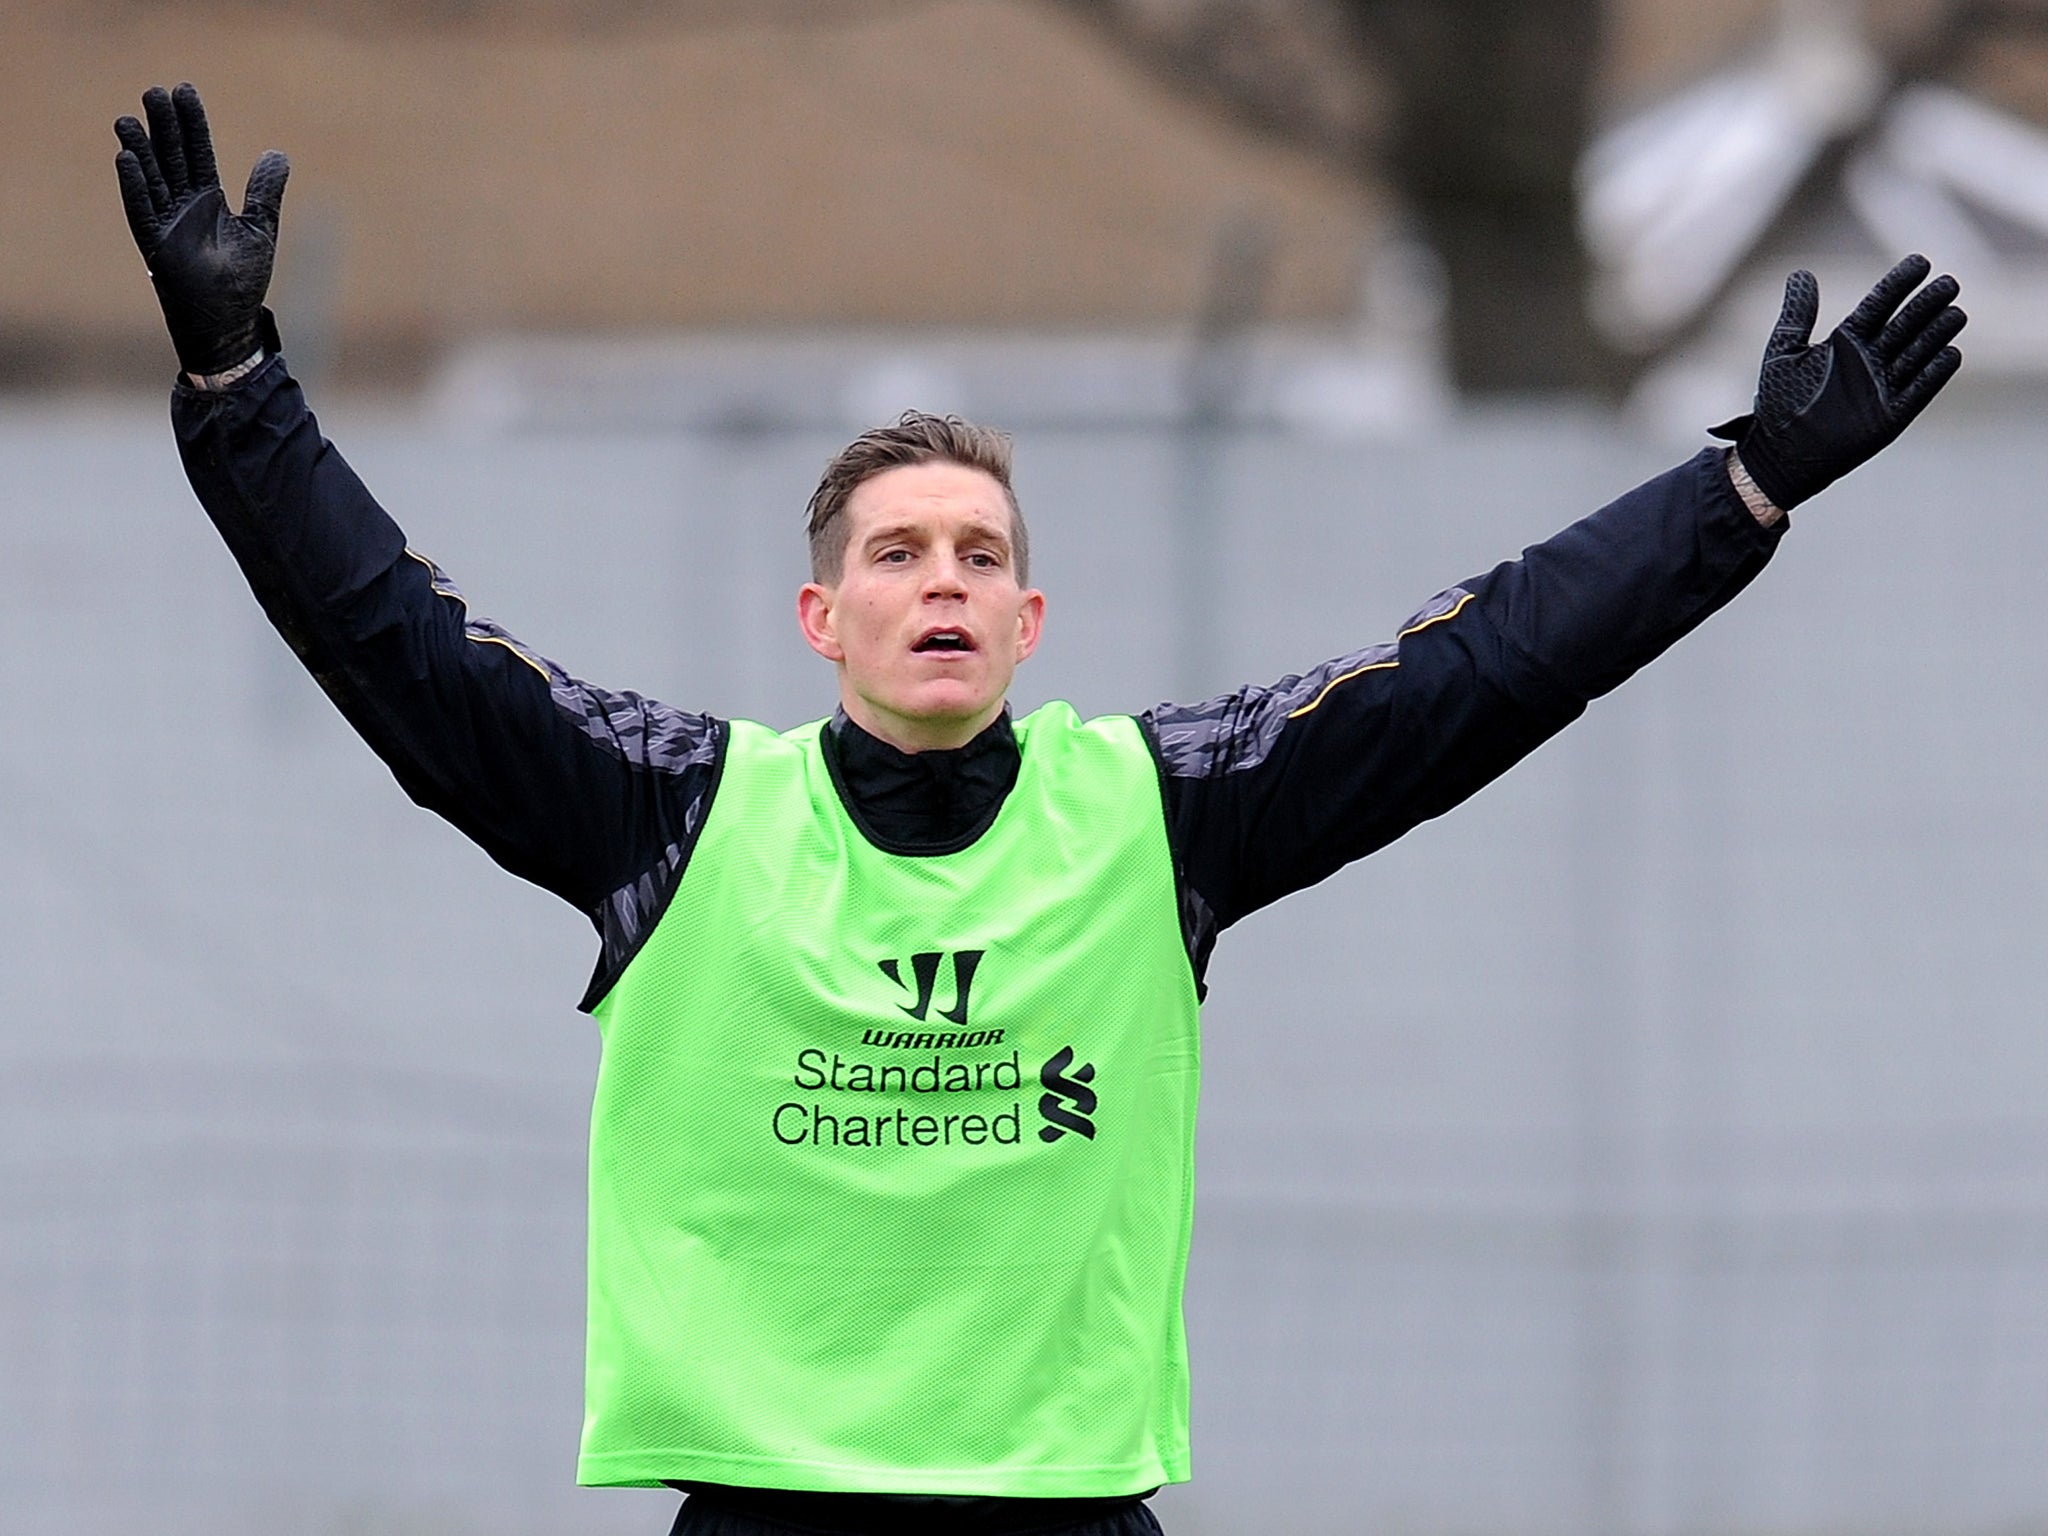 Daniel Agger could make a return to the Liverpool team for the FA Cup trip to Arsenal